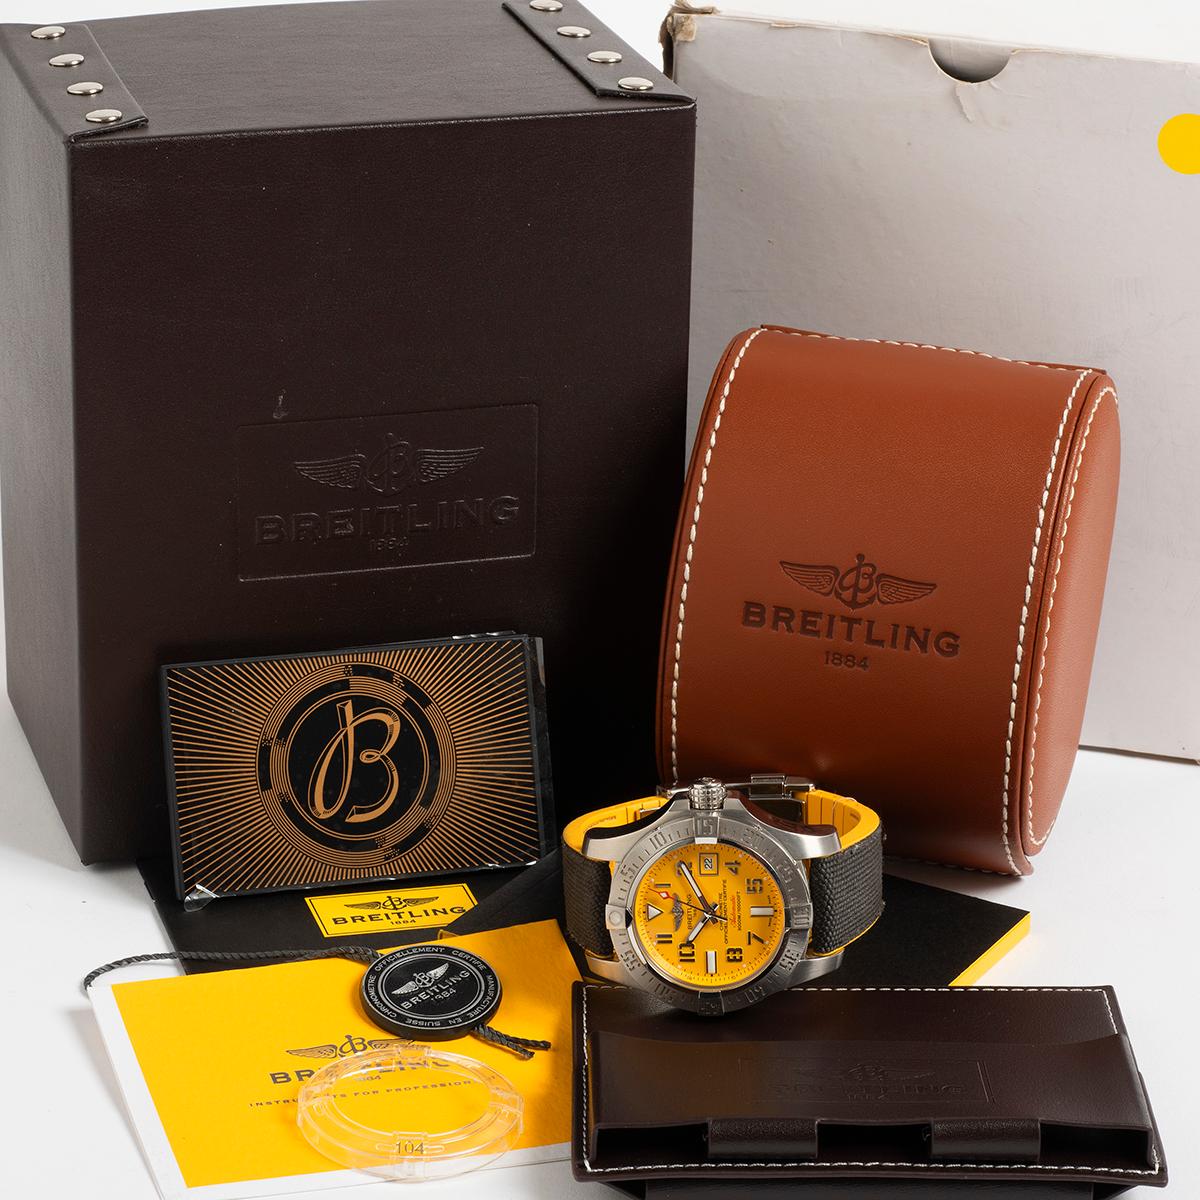 Our automatic Breitling Avenger II Seawolf with date, reference A1733110, with stainless steel 45mm case features the more desirable cobra yellow arabic/ baton dial and black leather strap. A complete set, presented in outstanding condition with